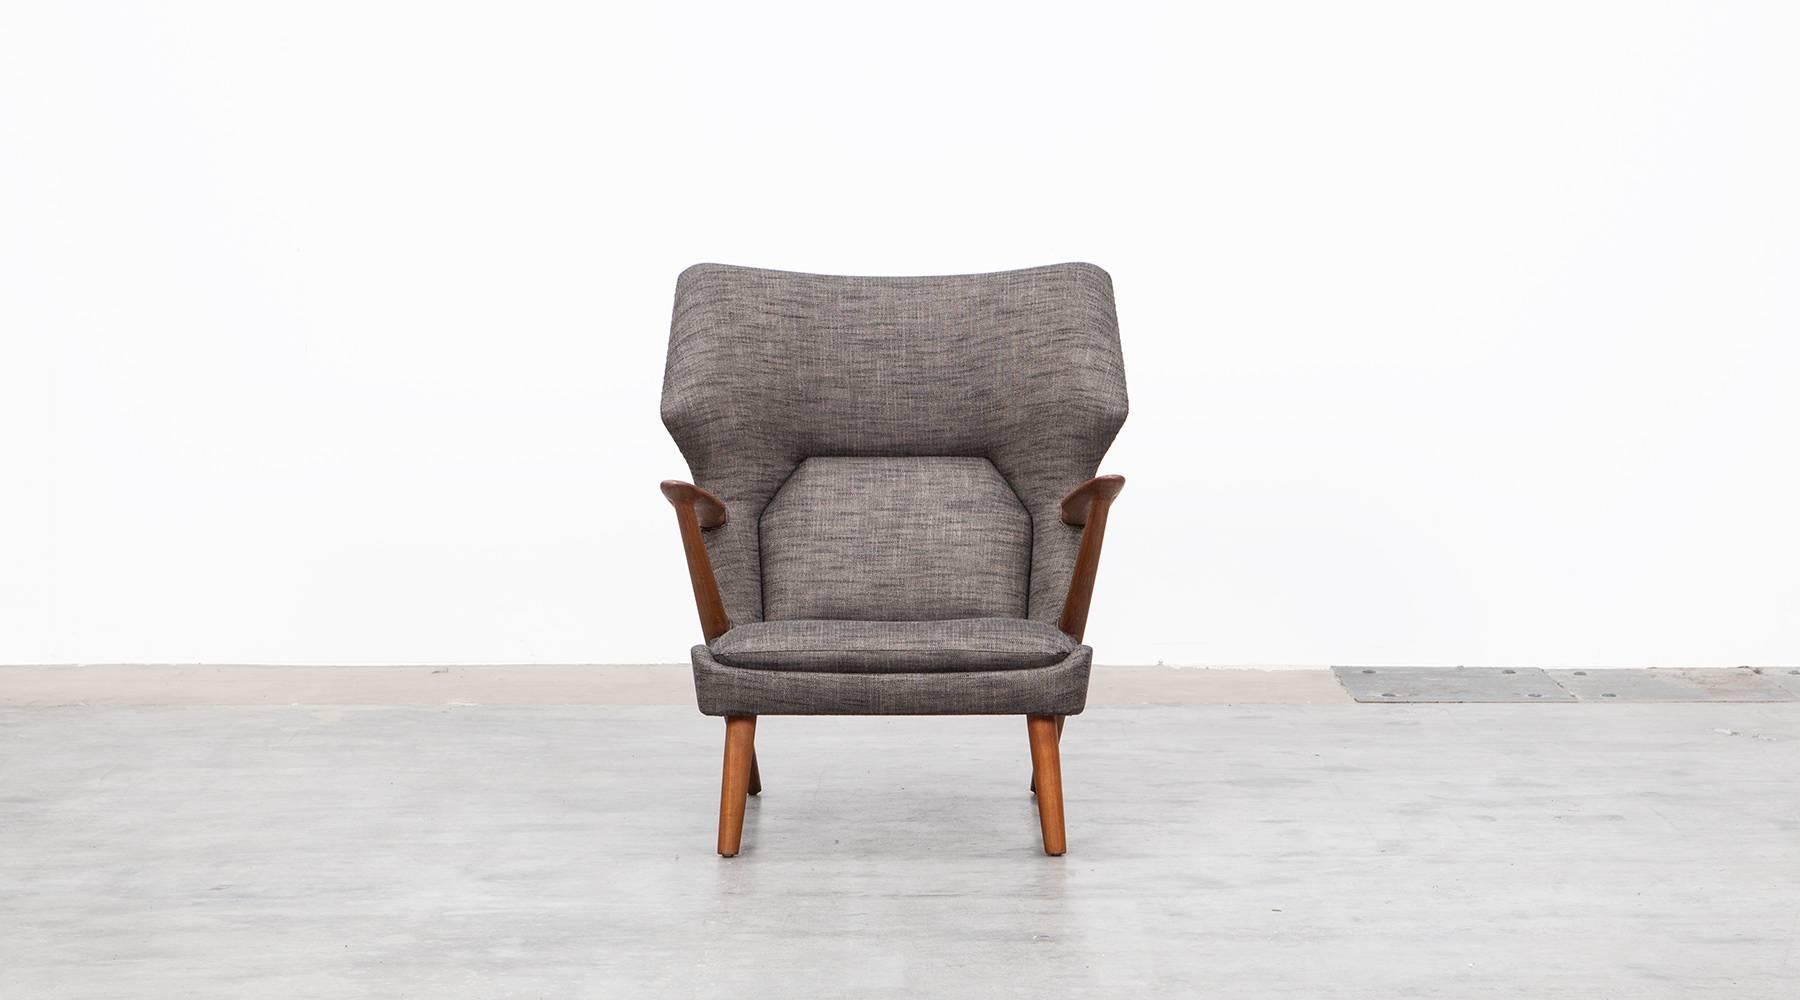 Lounge chair with matching ottoman designed by Danish designer Kurt Olsen. Specially worked cushions in seat and back area. The wooden frame is reworked as well as newly upholstered with high-quality fabric. This chair is a cheaper alternative to a